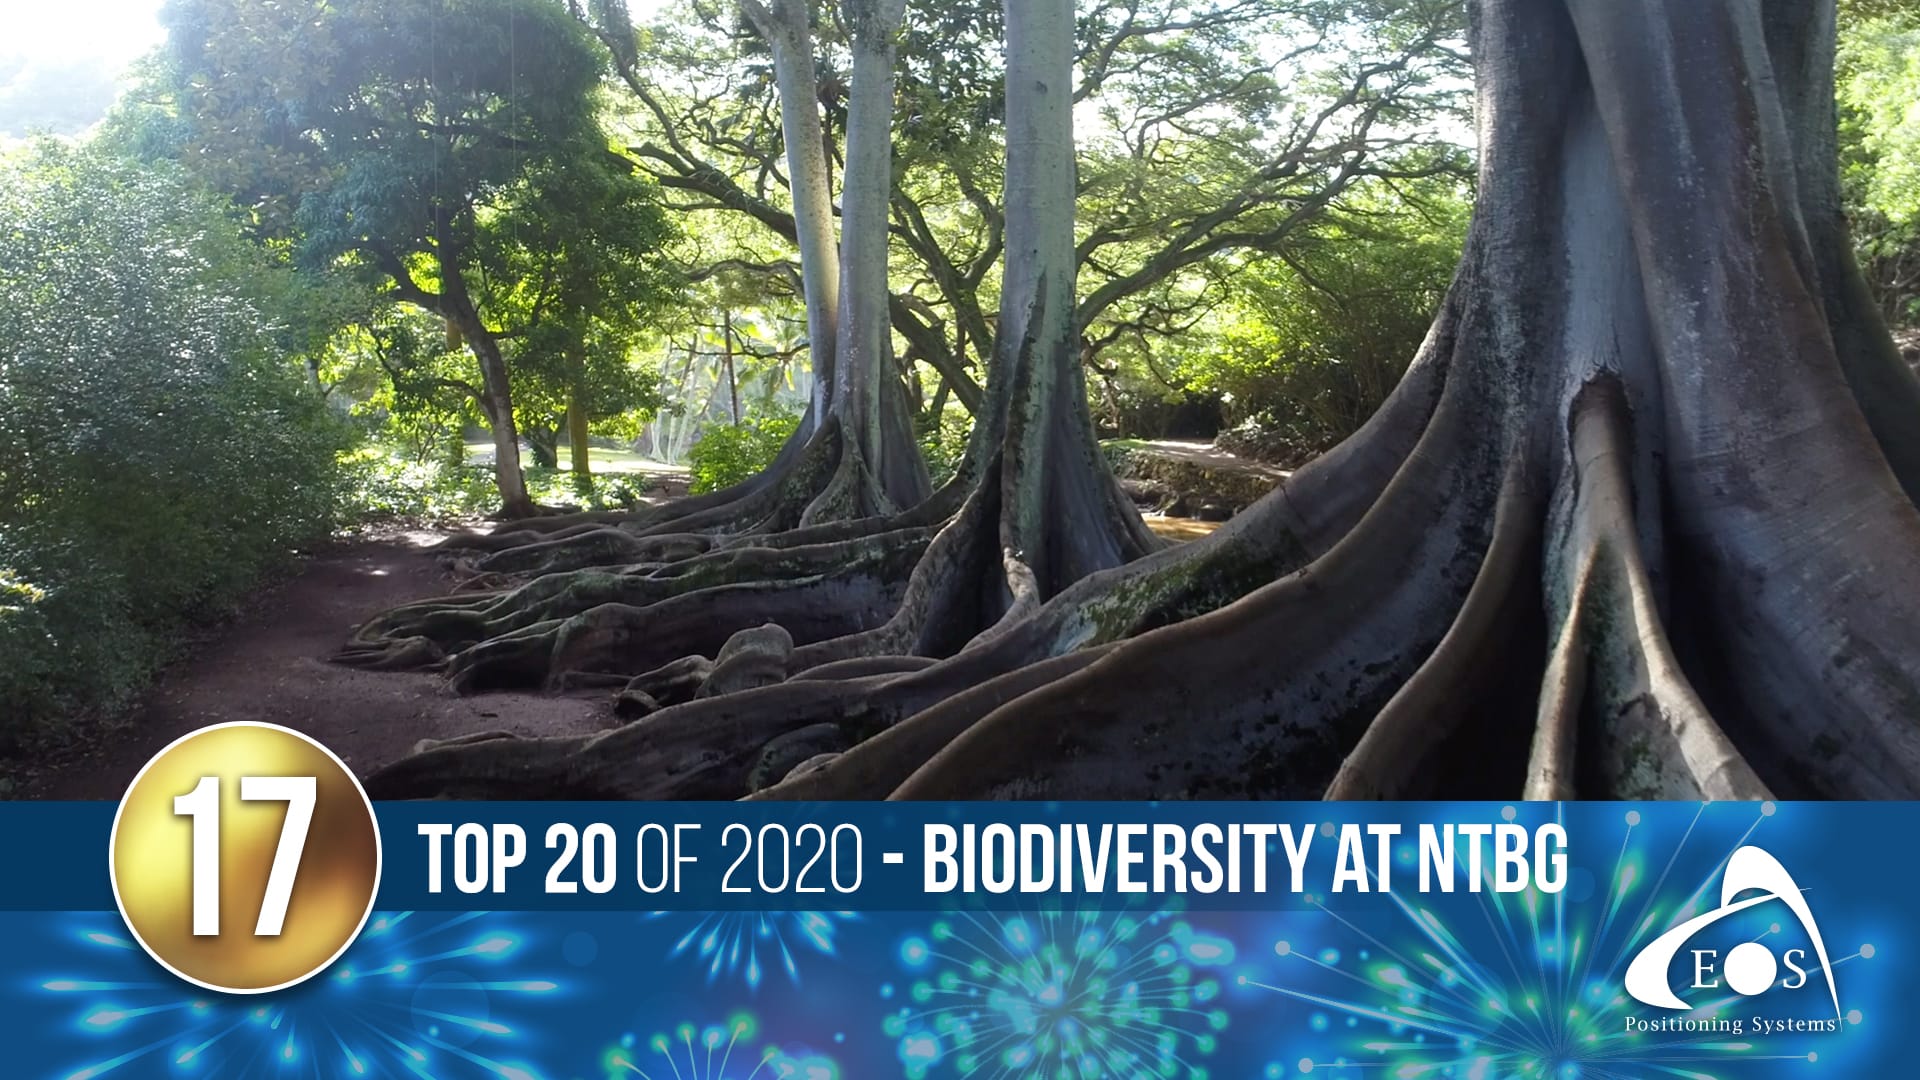 Eos Positioning Systems blog top articles of 2020: 17 - Biodiversity at NTBG